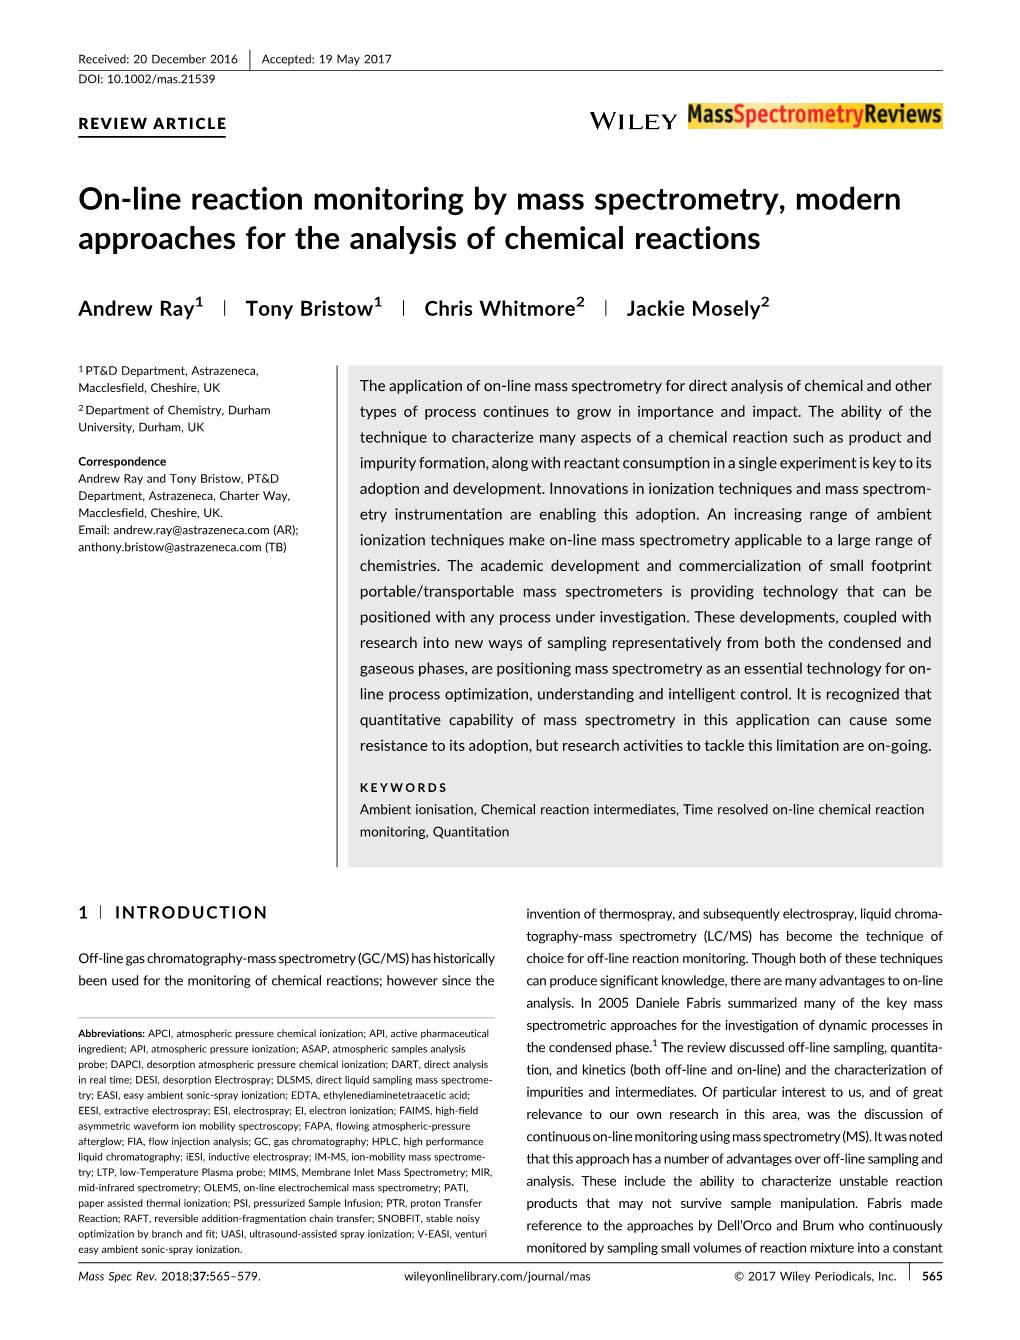 On-Line Reaction Monitoring by Mass Spectrometry, Modern Approaches for the Analysis of Chemical Reactions